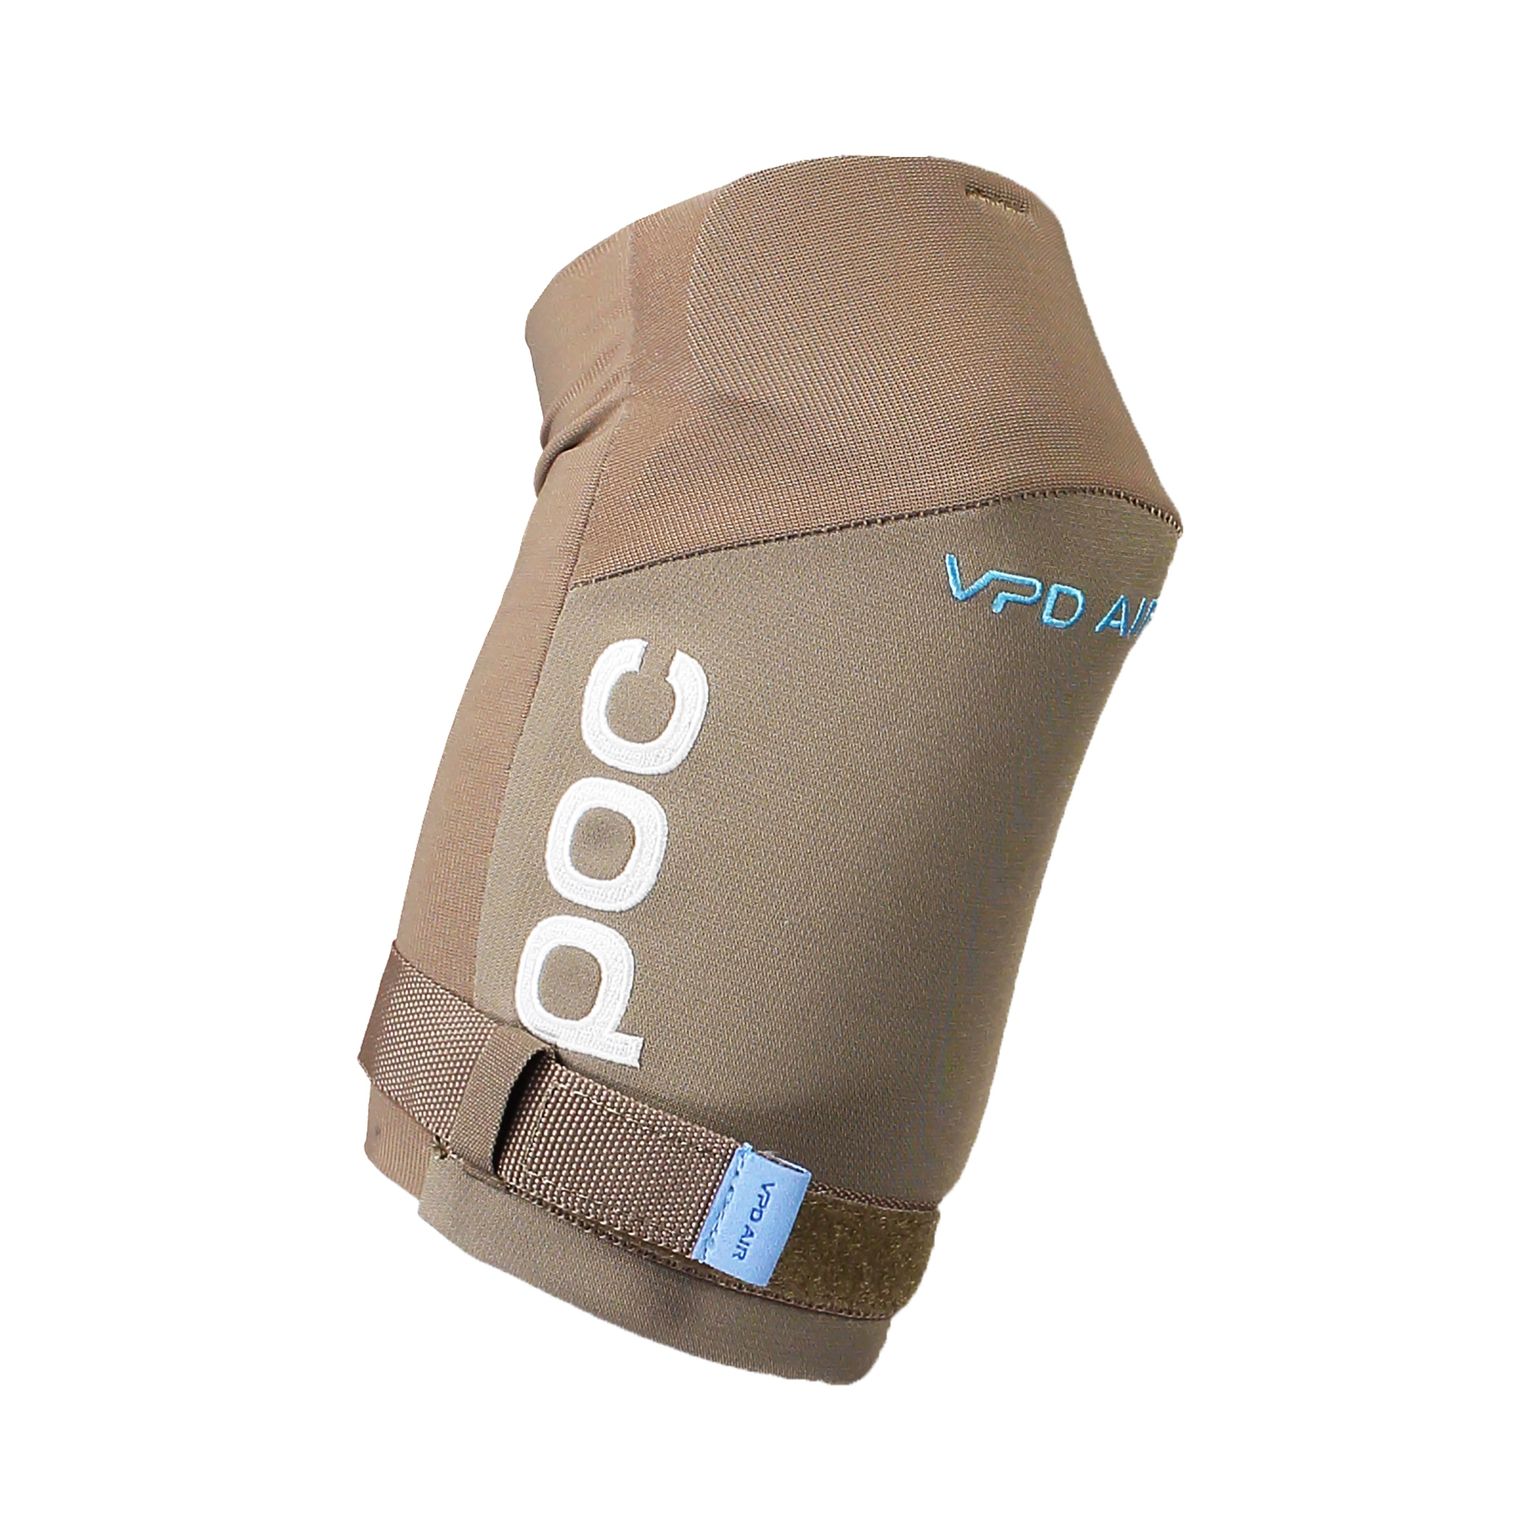 Joint VPD Air Elbow Obsydian Brown